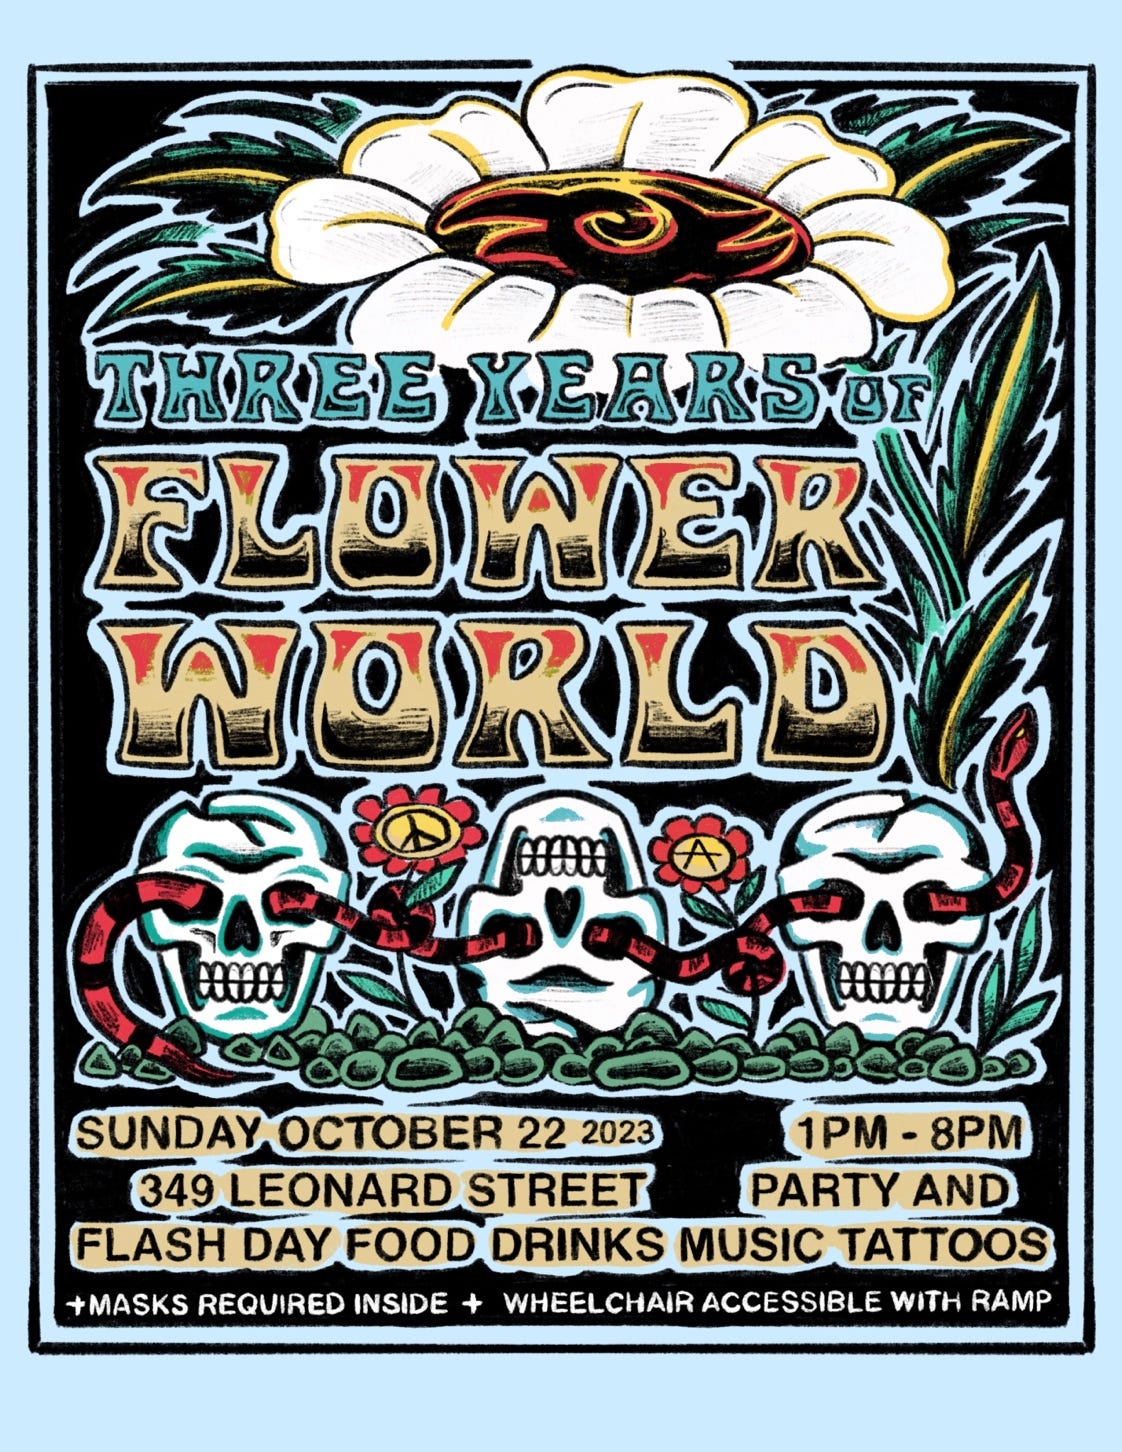 A poster for a flower world

Description automatically generated